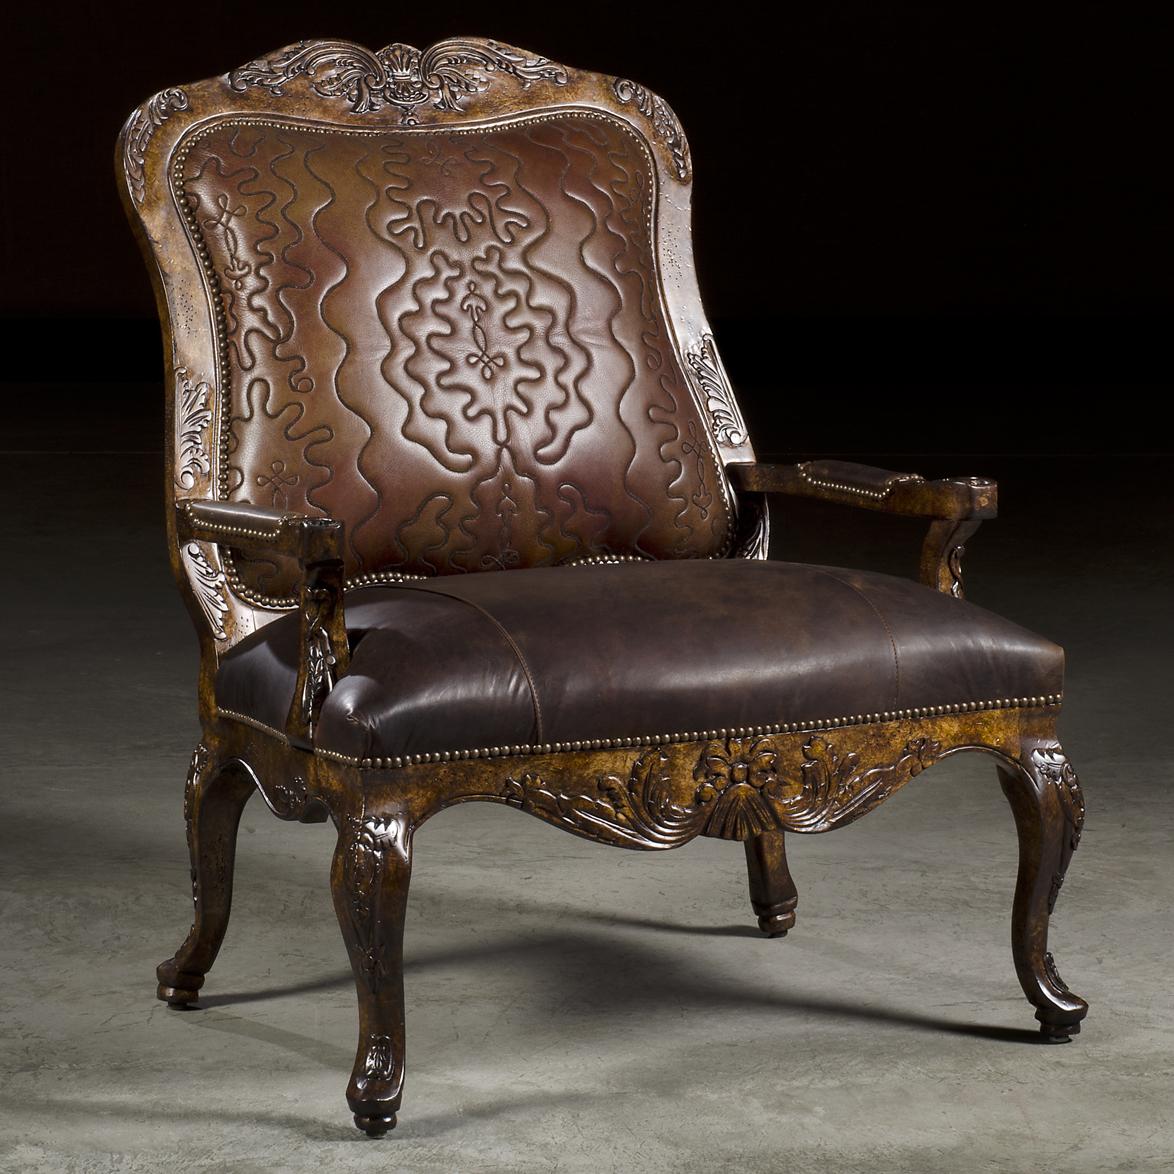 Traditional Styled Accent Chair with Exposed Wood Frame and Elegant Carved Details